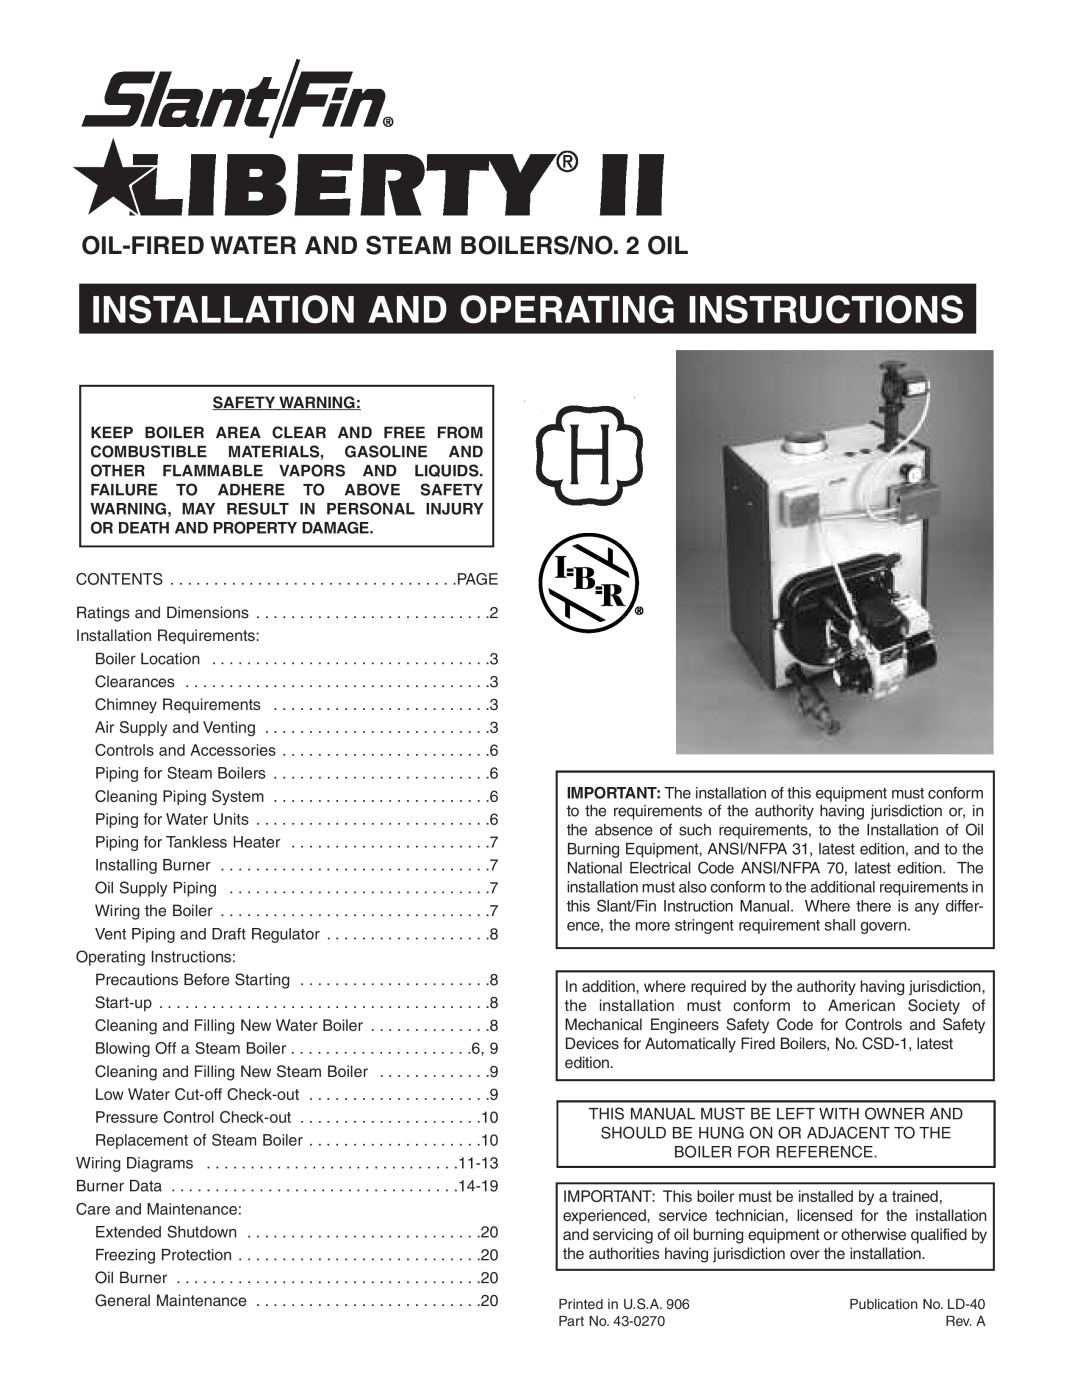 Slant/Fin dimensions Liberty, Installation And Operating Instructions, OIL-FIREDWATER AND STEAM BOILERS/NO. 2 OIL 